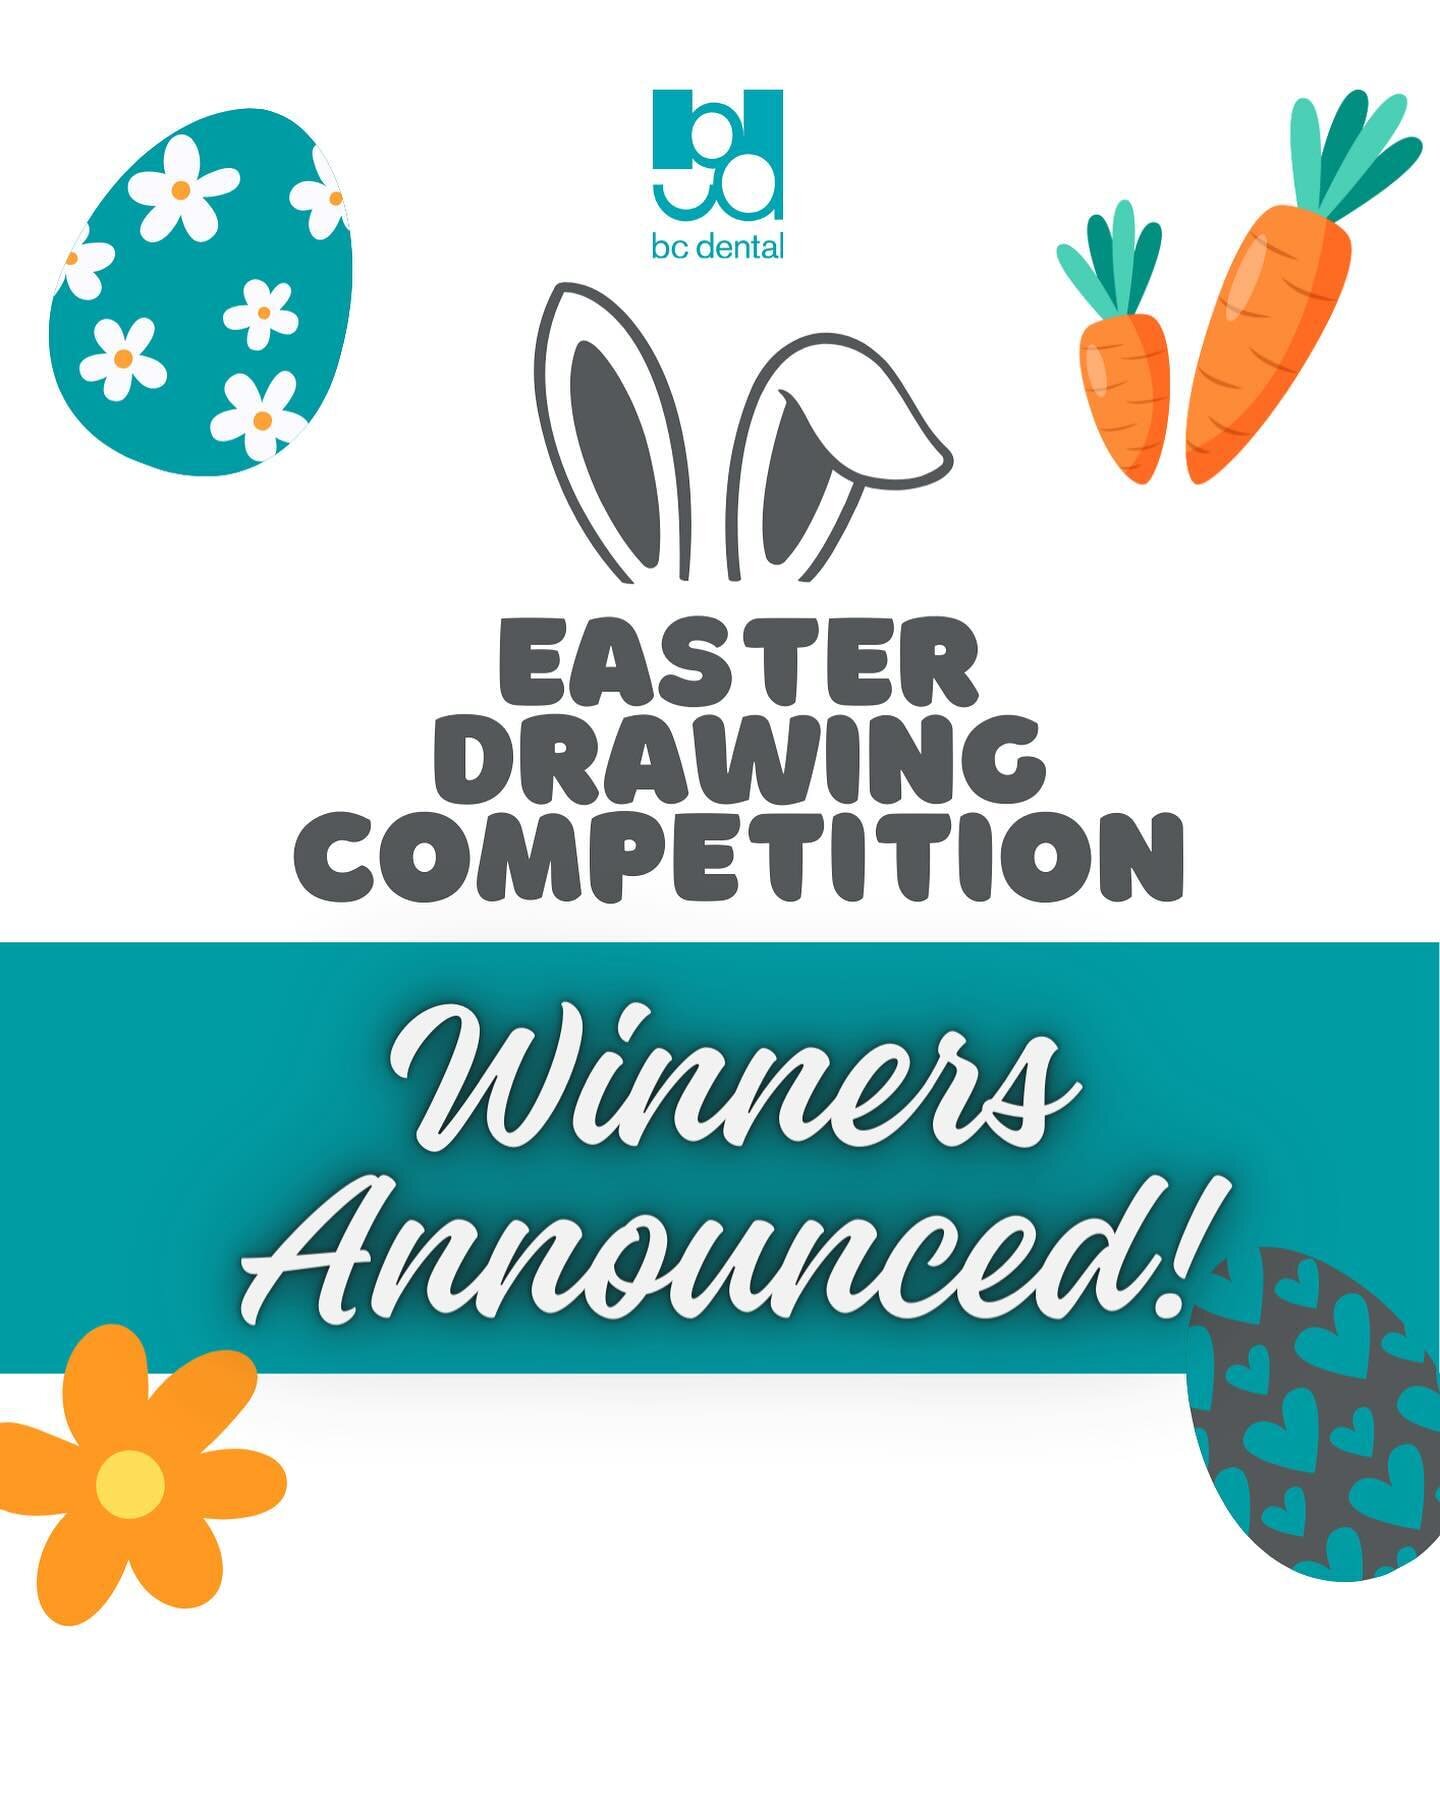 Swipe 👉 to see our WINNERS ANNOUNCED 📣📣

We had such beautiful submissions for our annual Easter Drawing Competition. Thank you to everyone who entered 🐰🐇 Winners will be contacted via text tomorrow 🎉